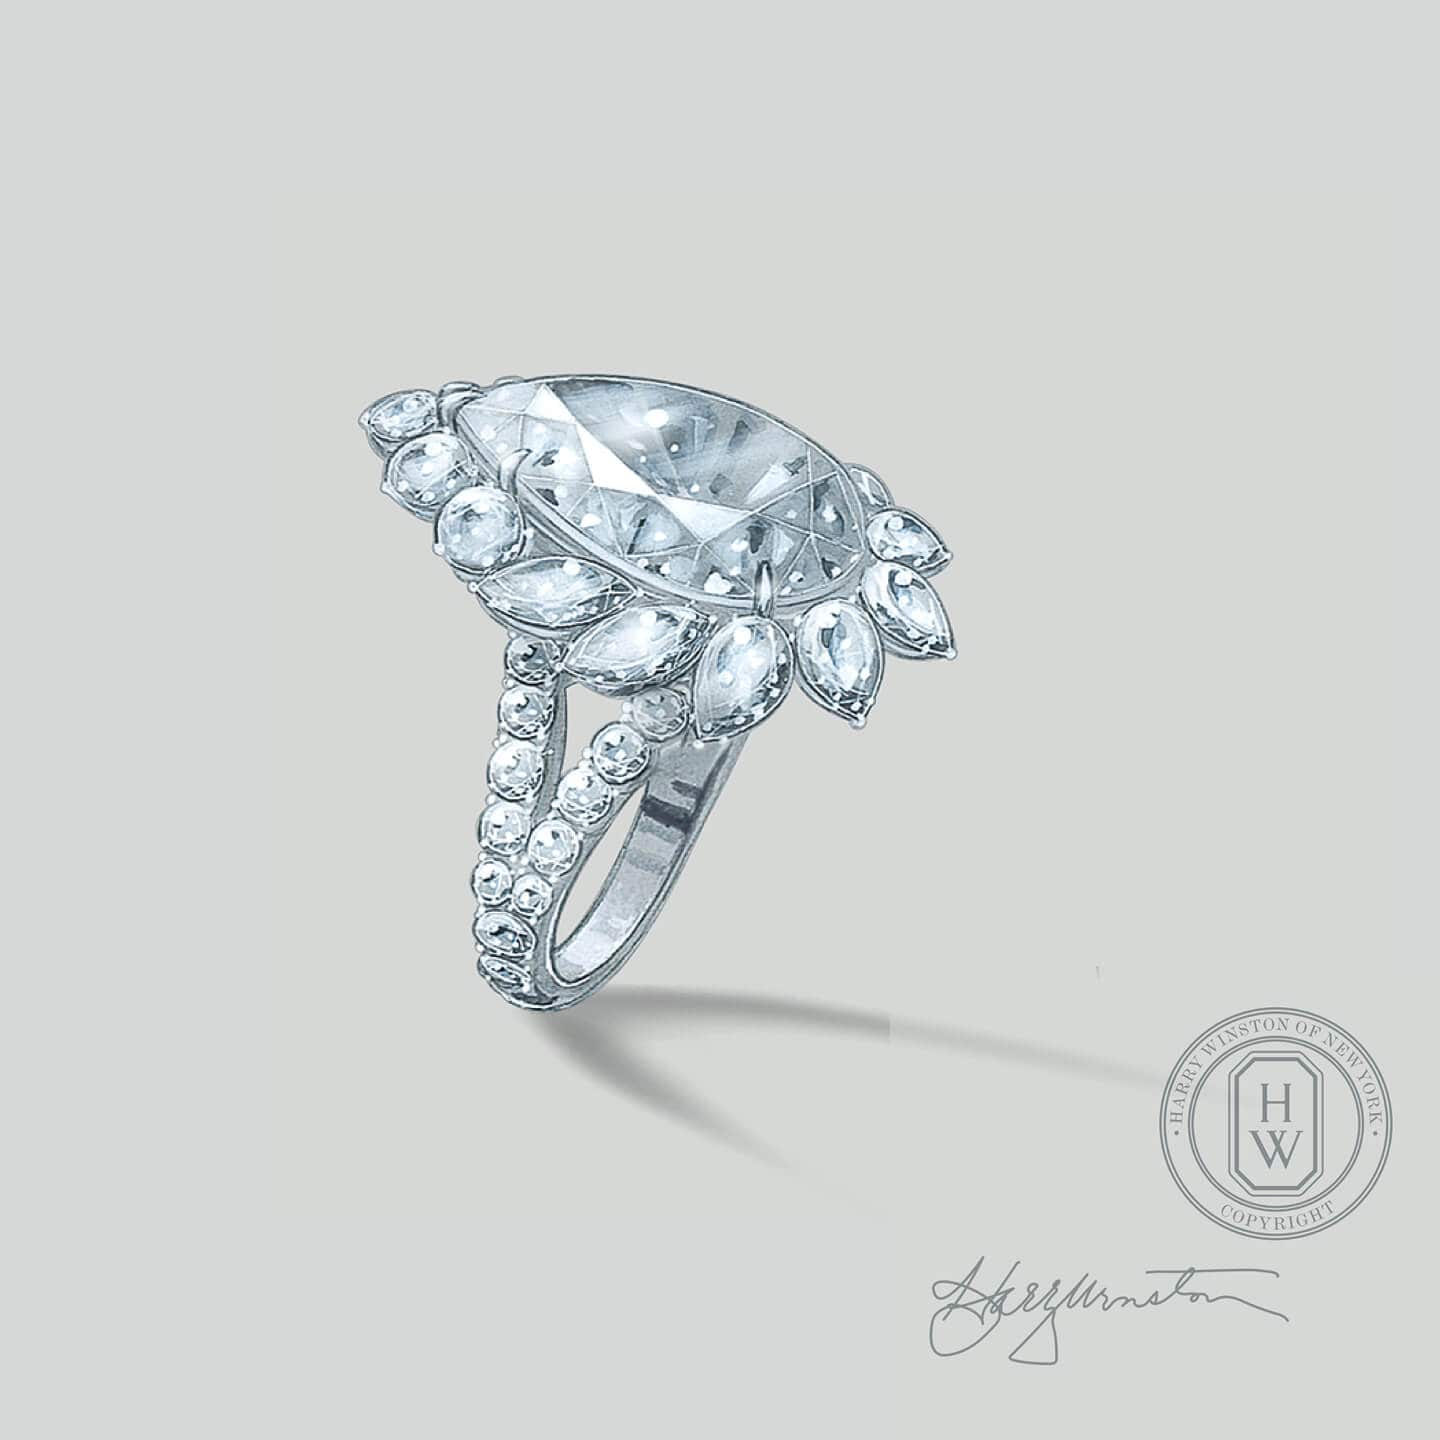 Sketch of a pear-shaped diamond ring from the Legacy Collection by Harry Winston